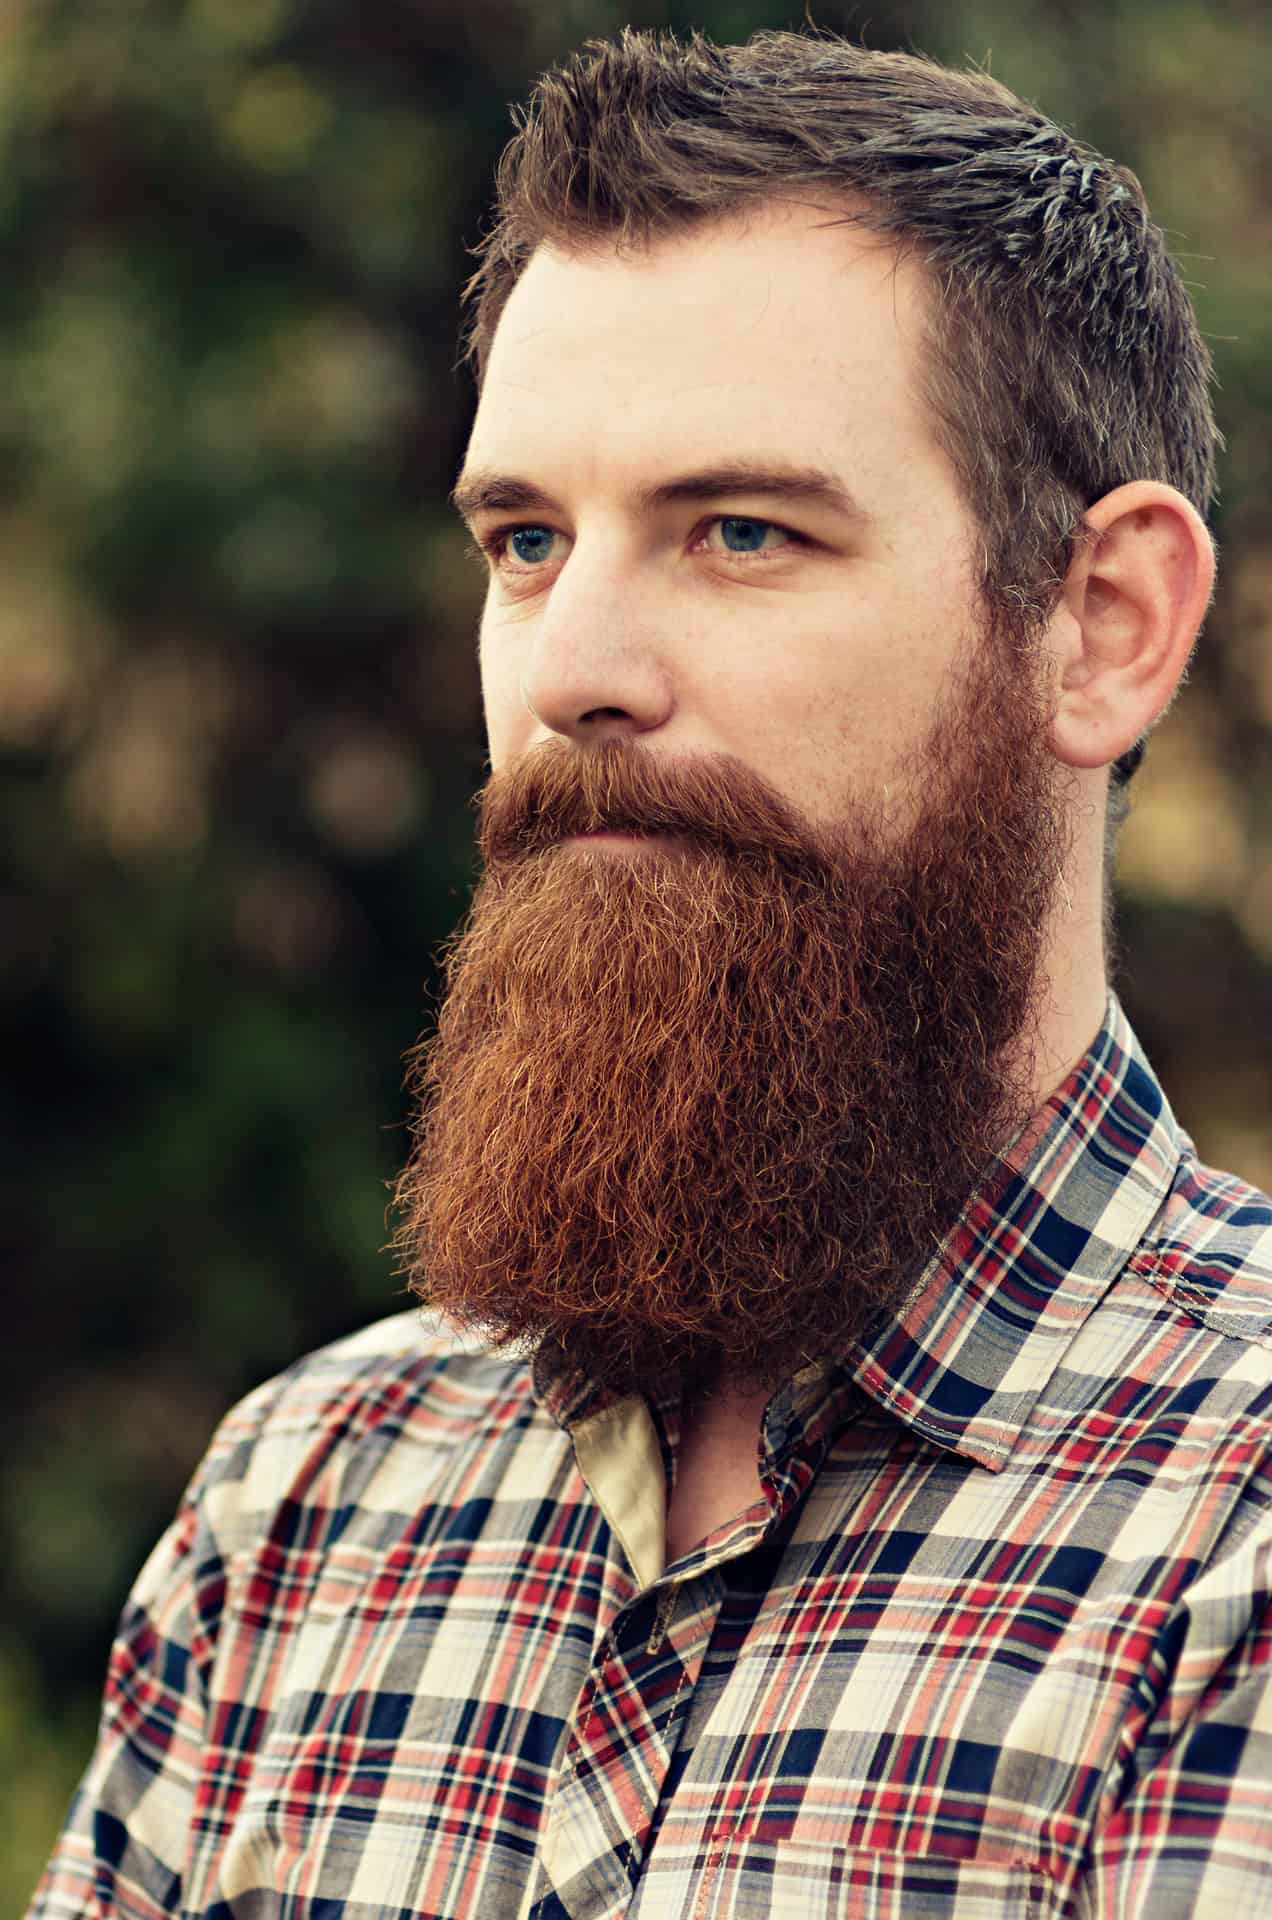 Beard with Healthy Look and Masculinity - Growing & Grooming Guide